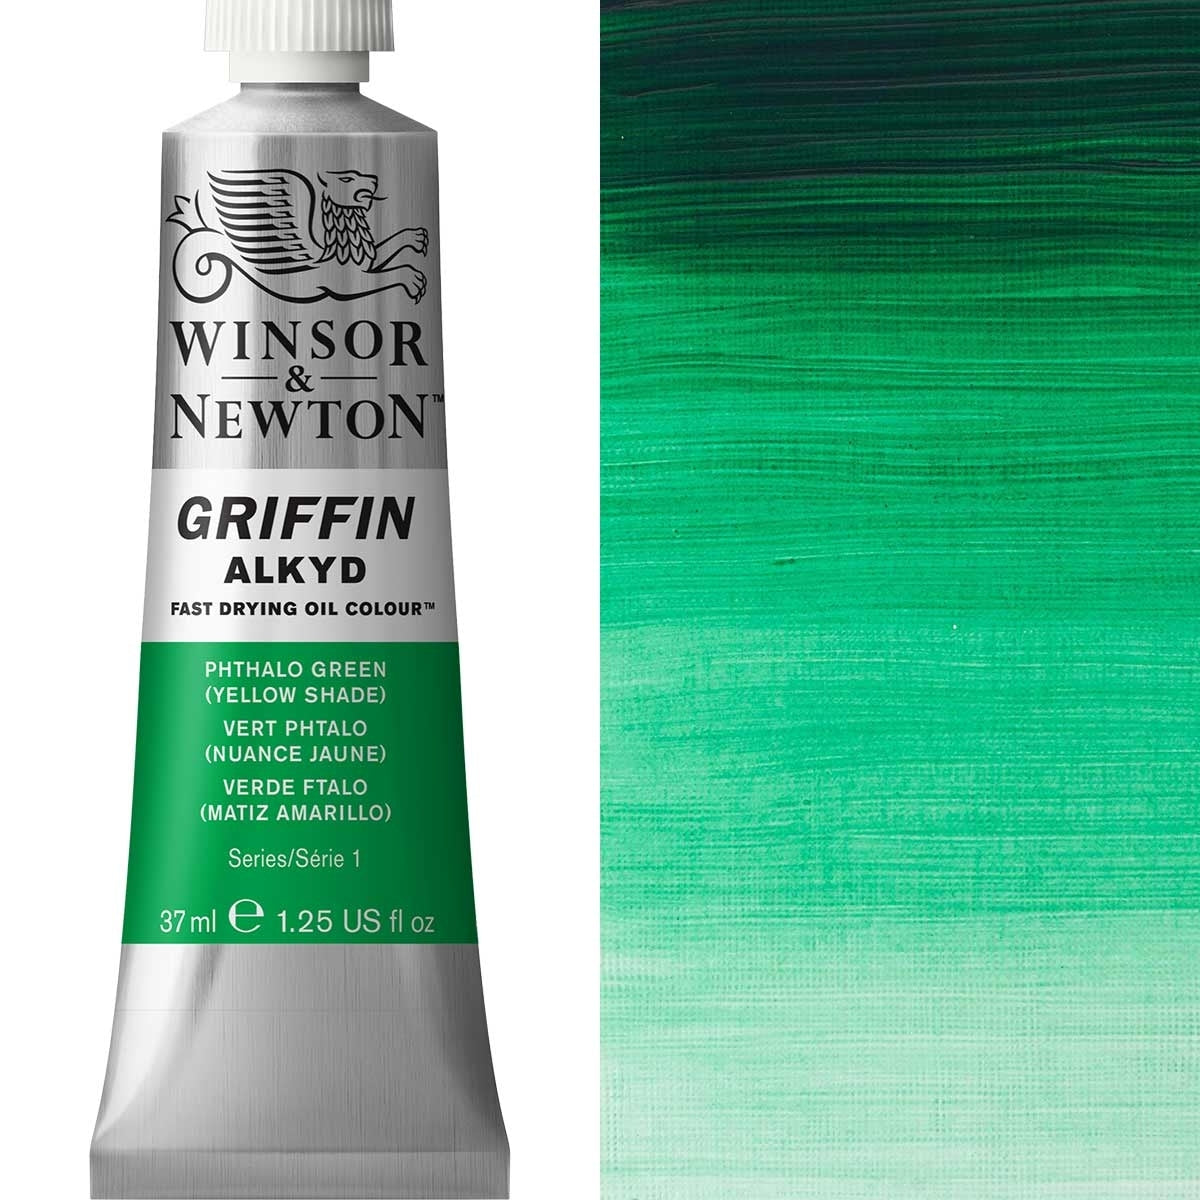 Winsor e Newton - Griffin Alkyd Oil Color - 37ml - Phthalo Green Yellow